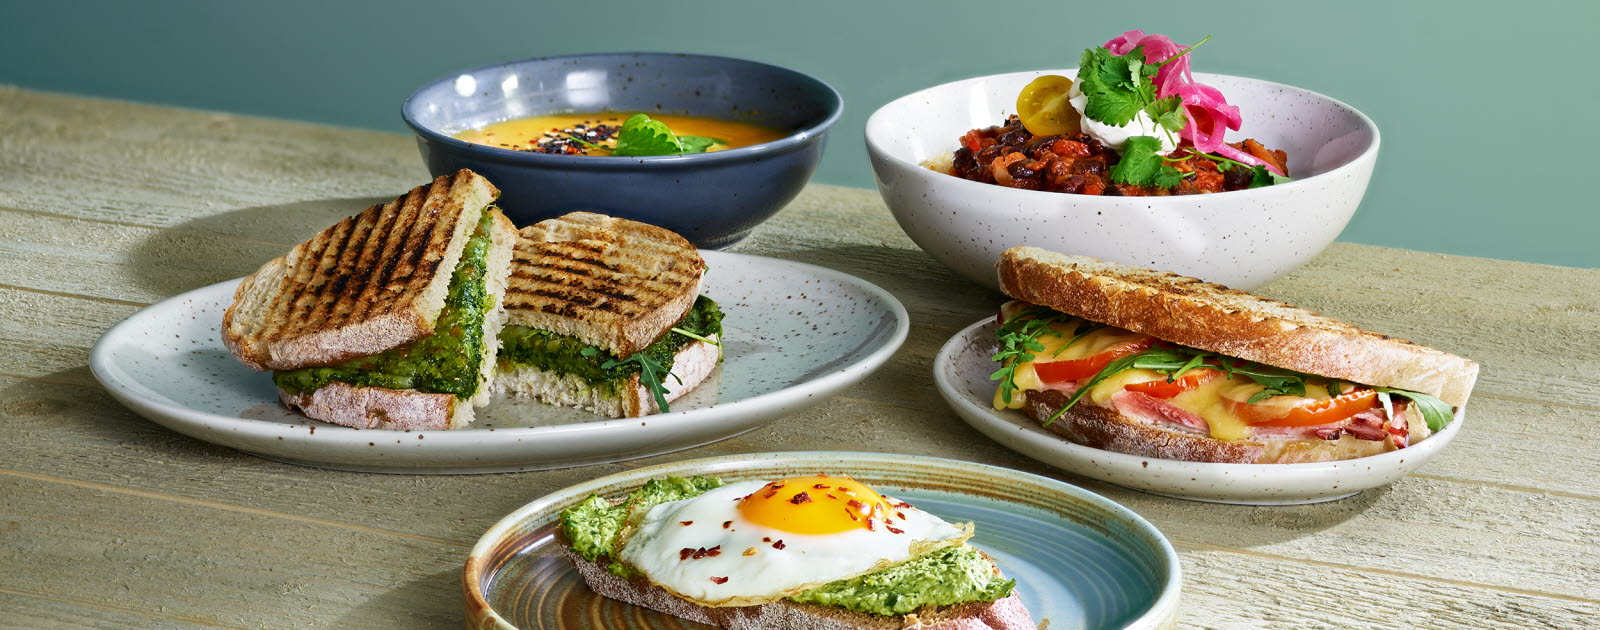 Three plates, each with a sandwich on it and two bowls in the back, one containing soup and one containing grilled vegatables.